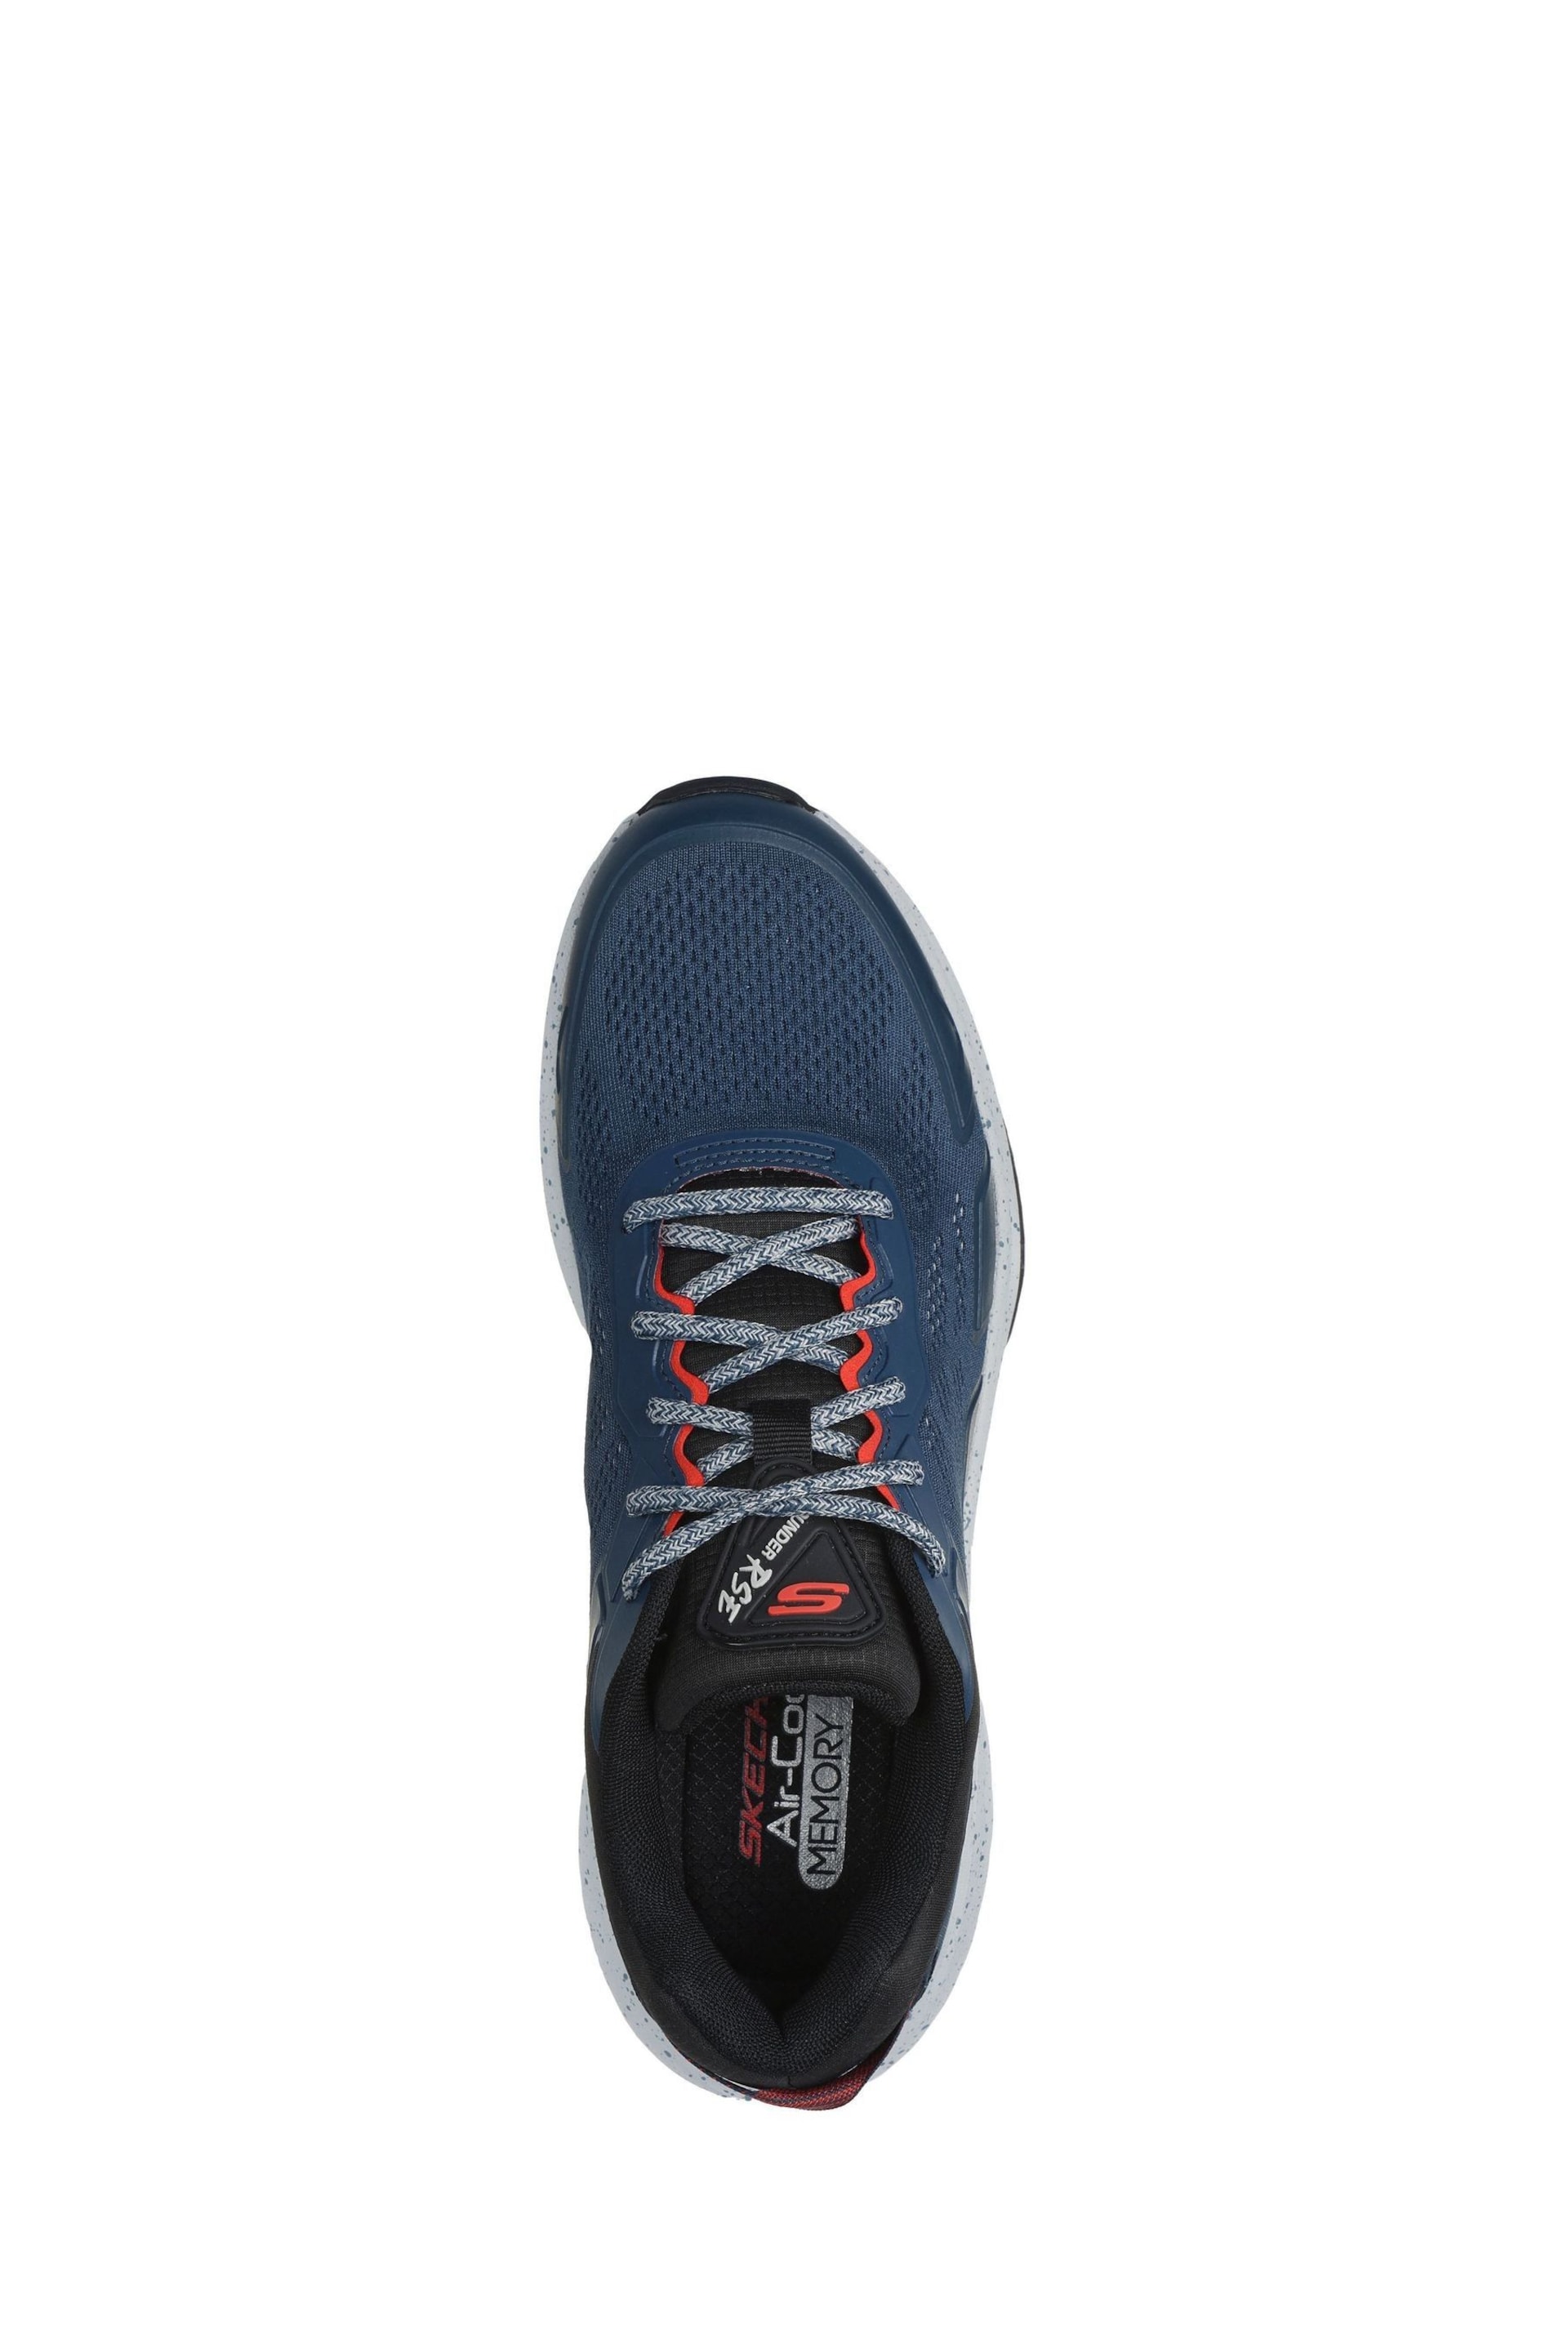 Skechers Blue Bounder Trainers - Image 3 of 4